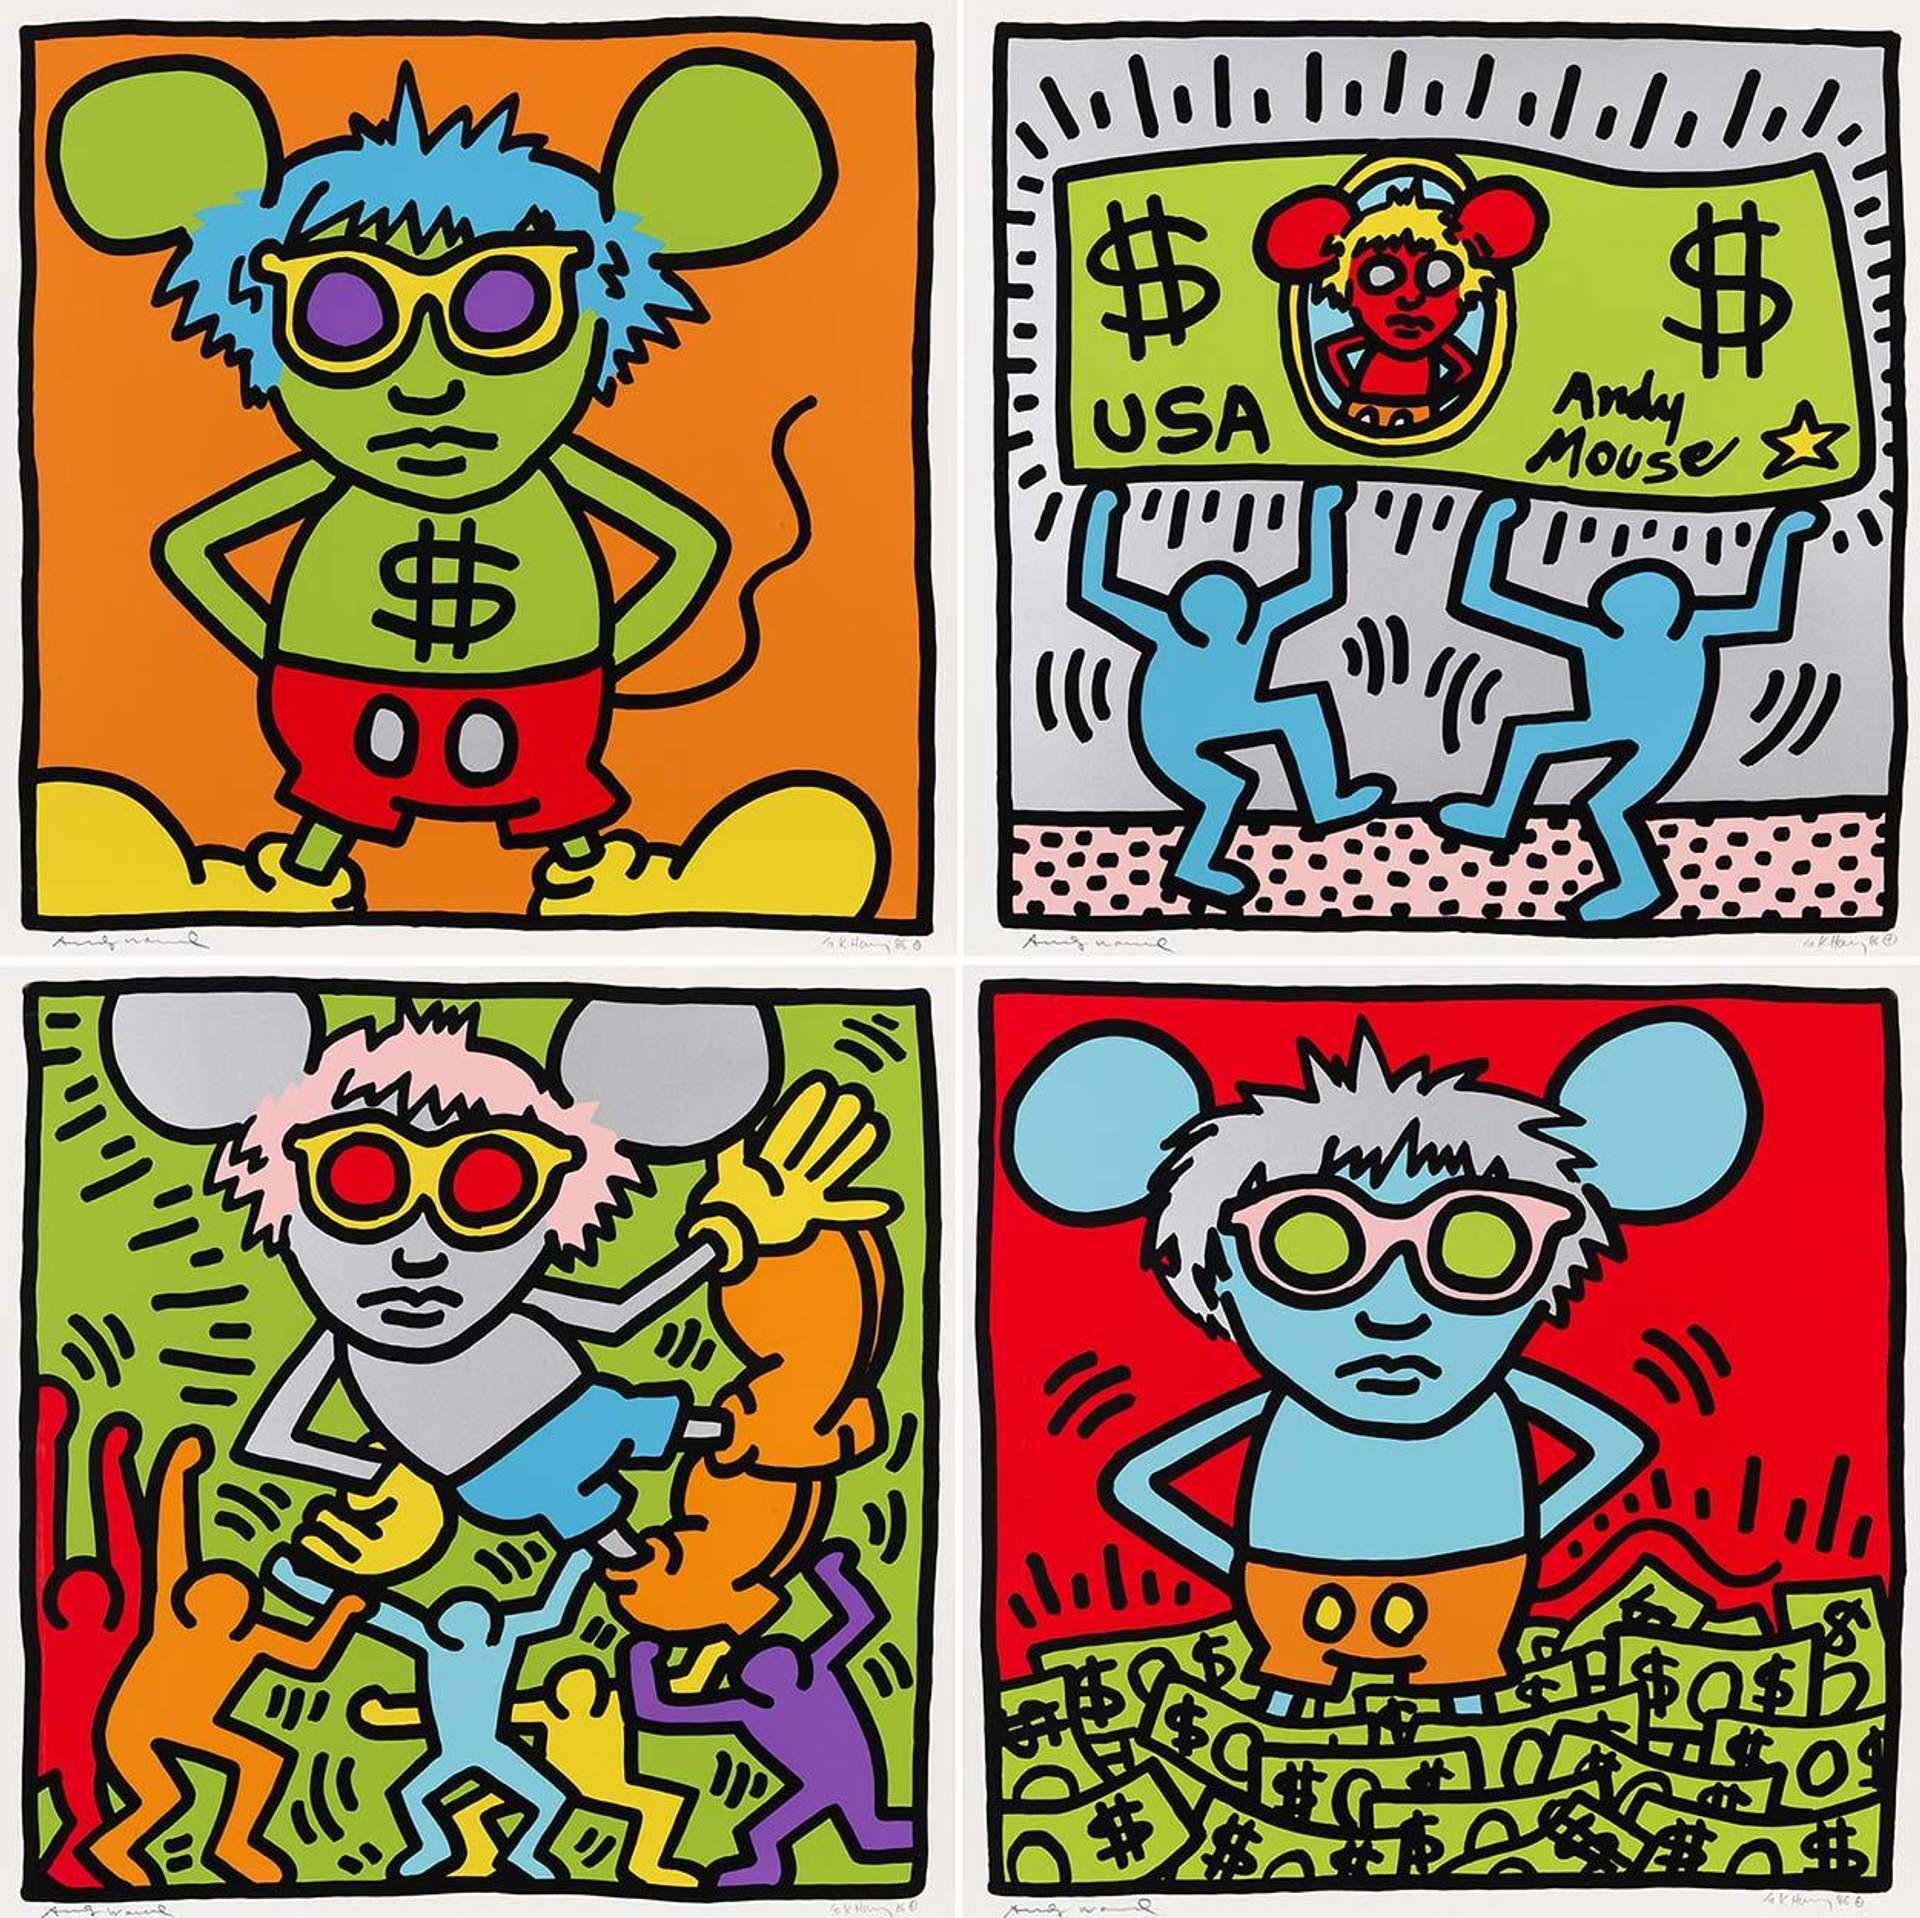 Andy Mouse (complete set) by Keith Haring